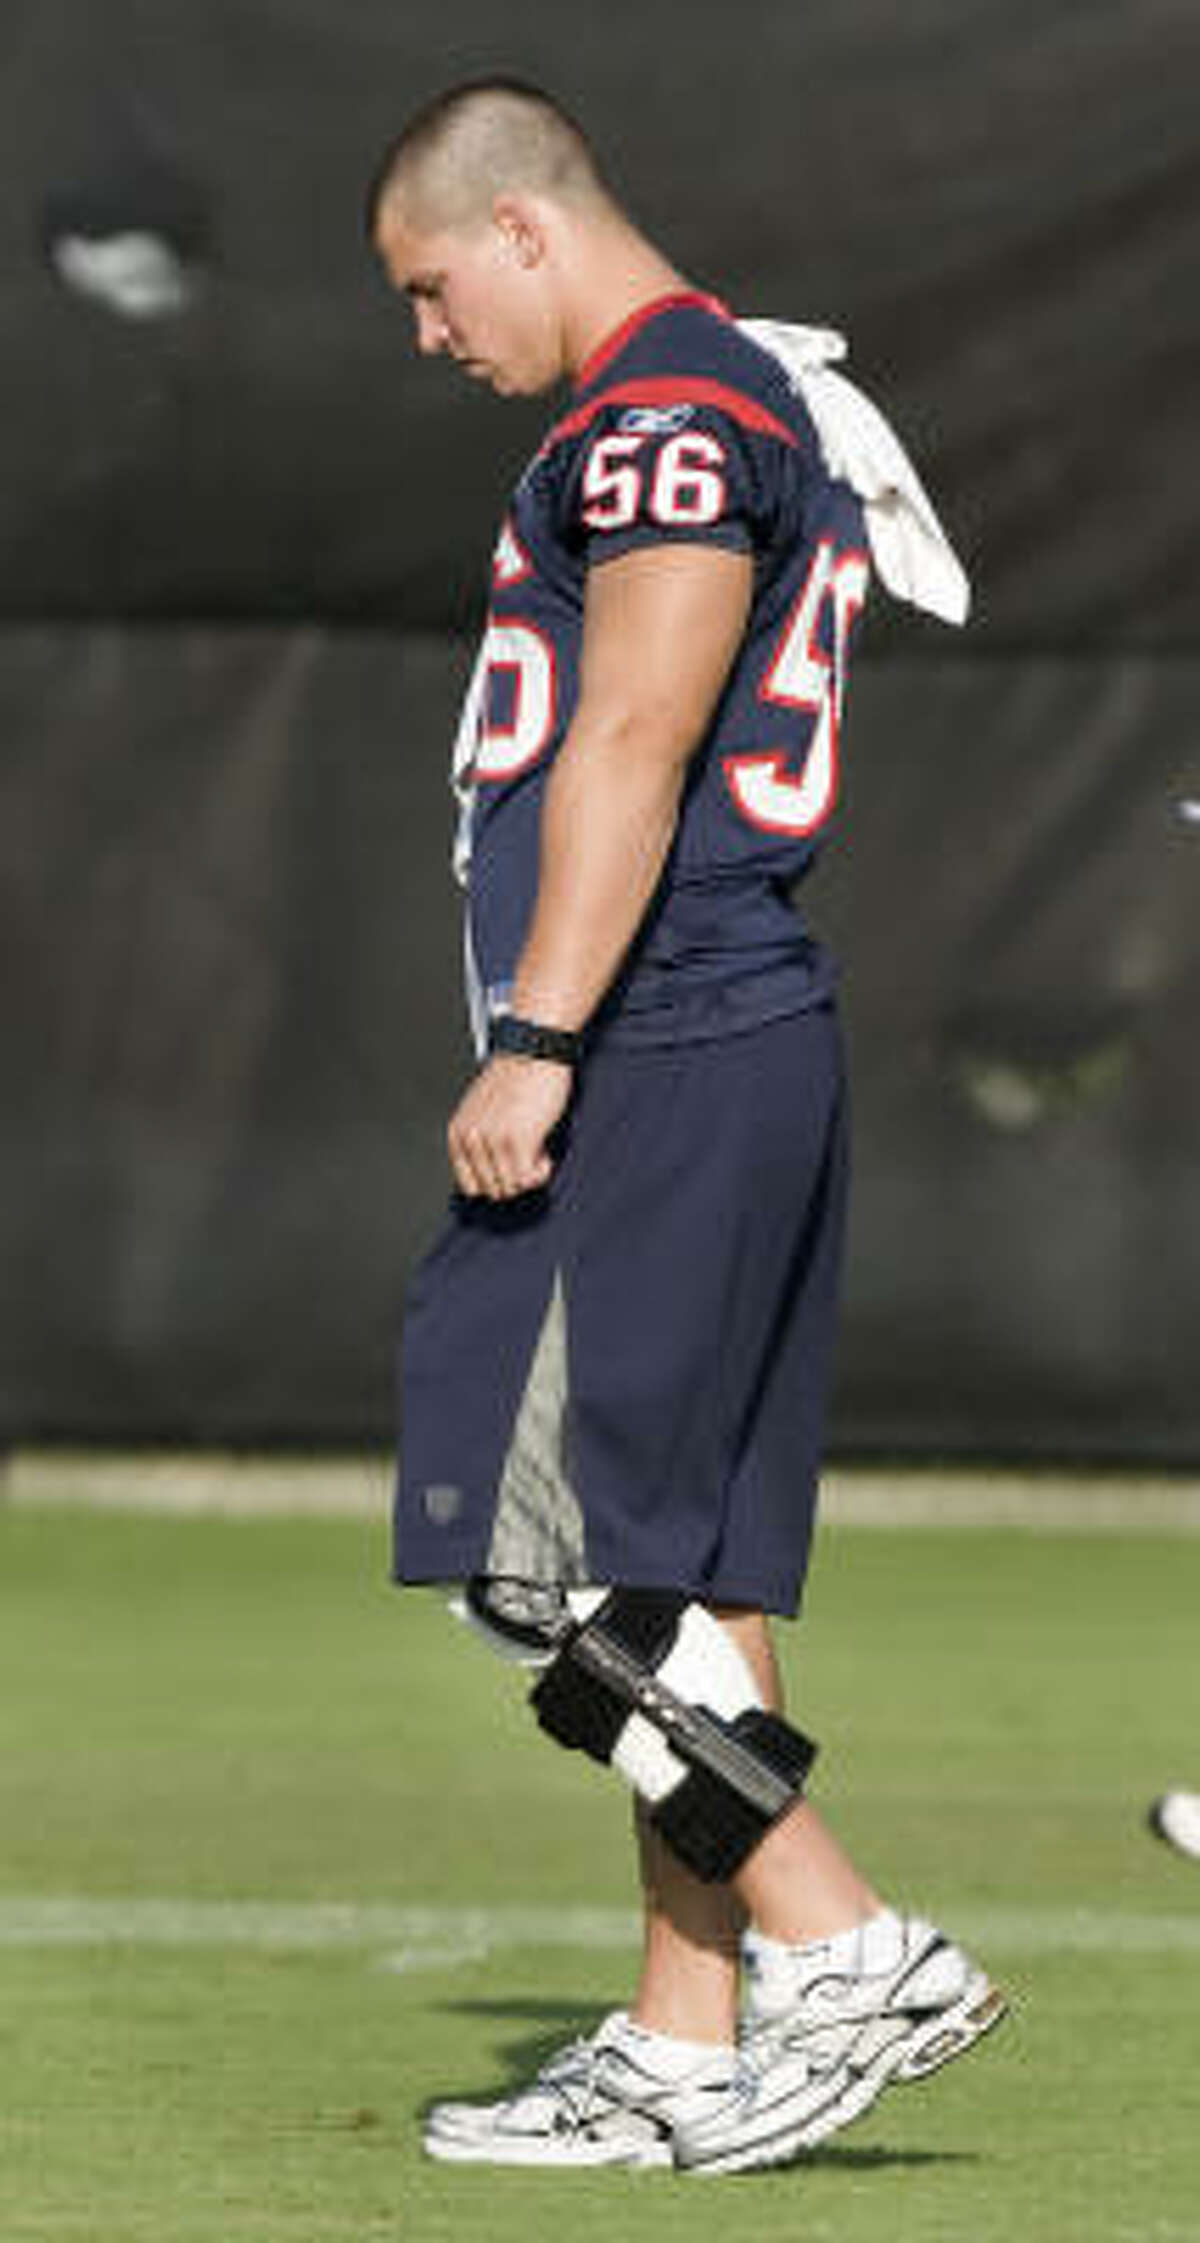 Linebacker Brian Cushing is forced to wear a knee brace after suffering a sprained left knee one day earlier.